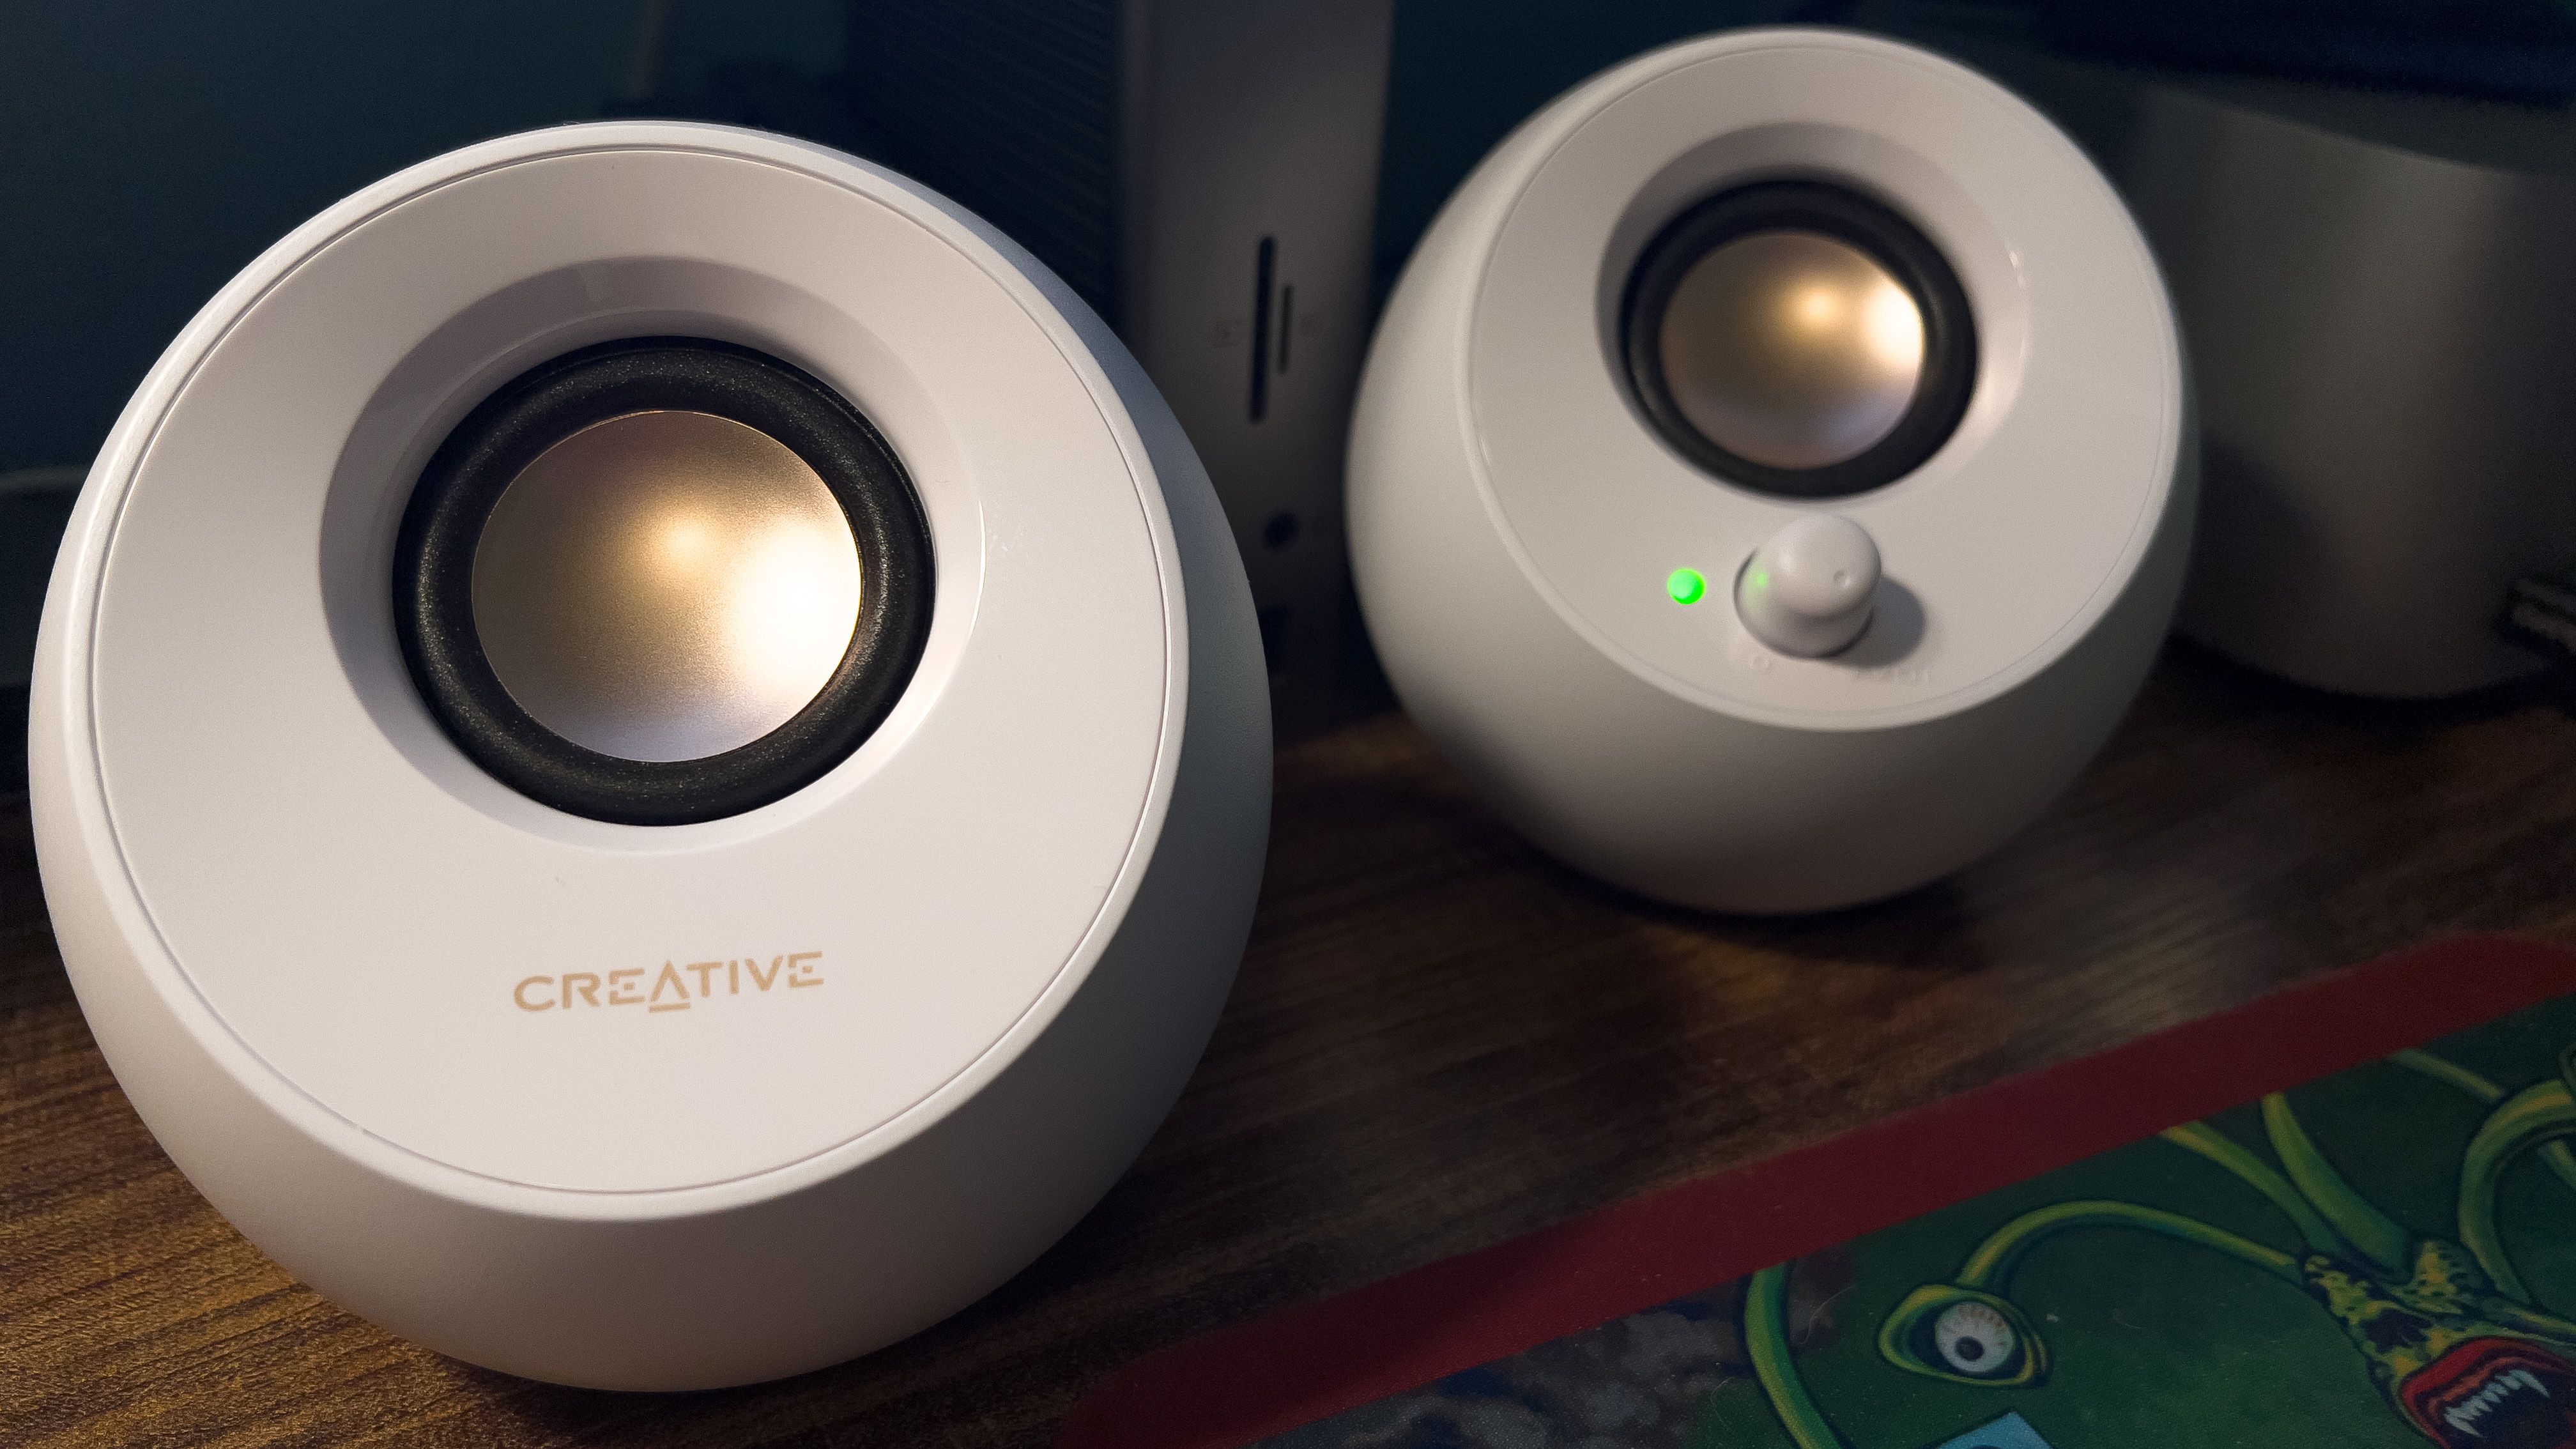 Creative adds to its Pebble line with the RGB lighting enabled